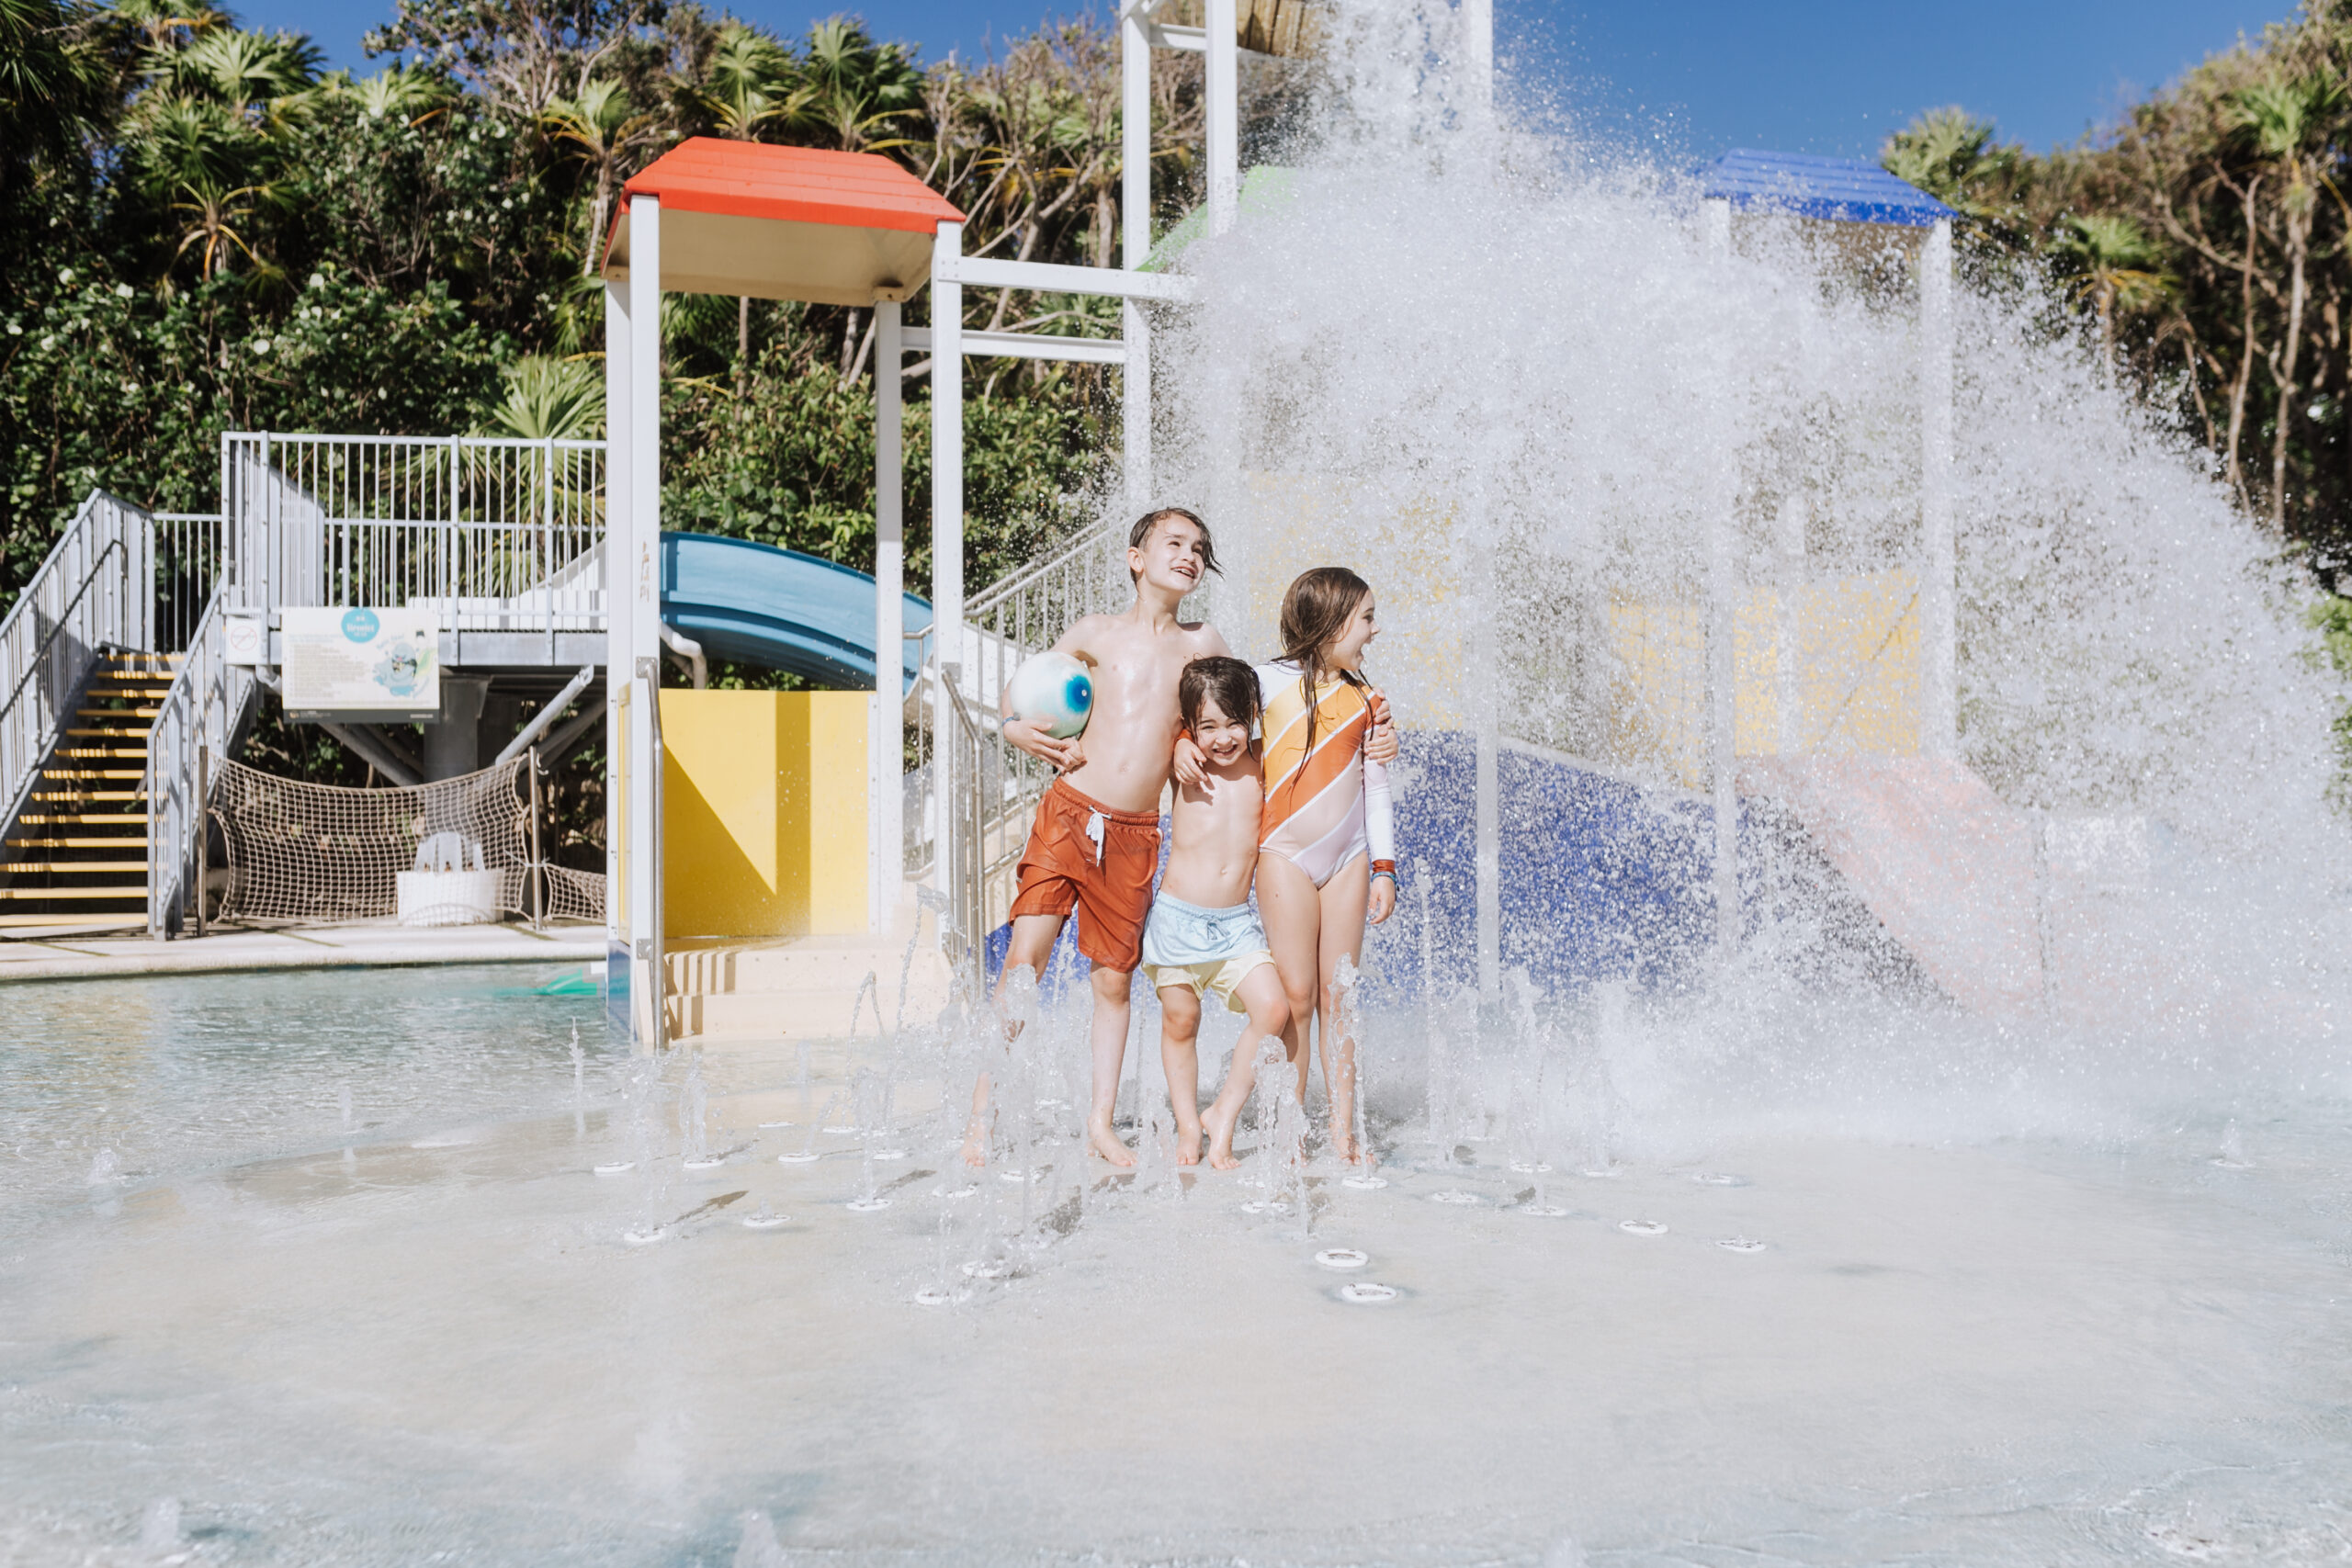 kids club at during our travels to mexico #kidsclub #splashpad #travels to mexico #travelwithkids